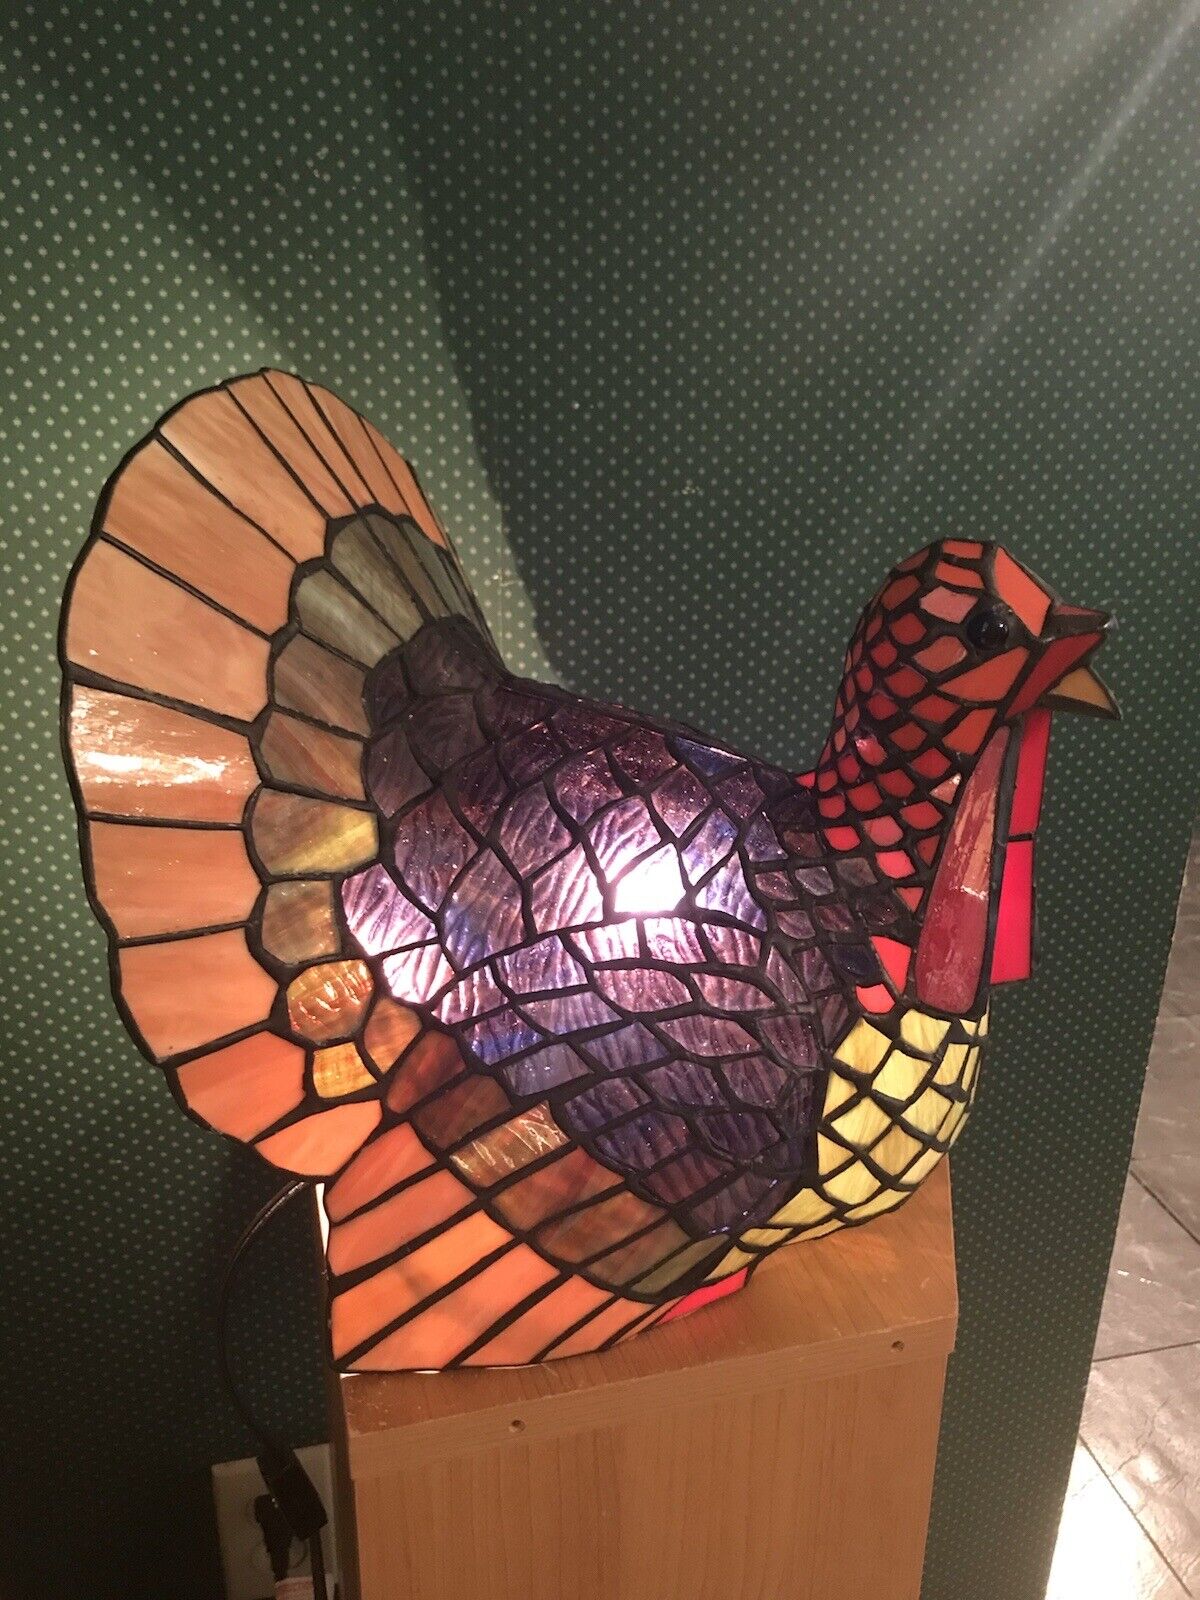 Stained Glass Turkey Lamp